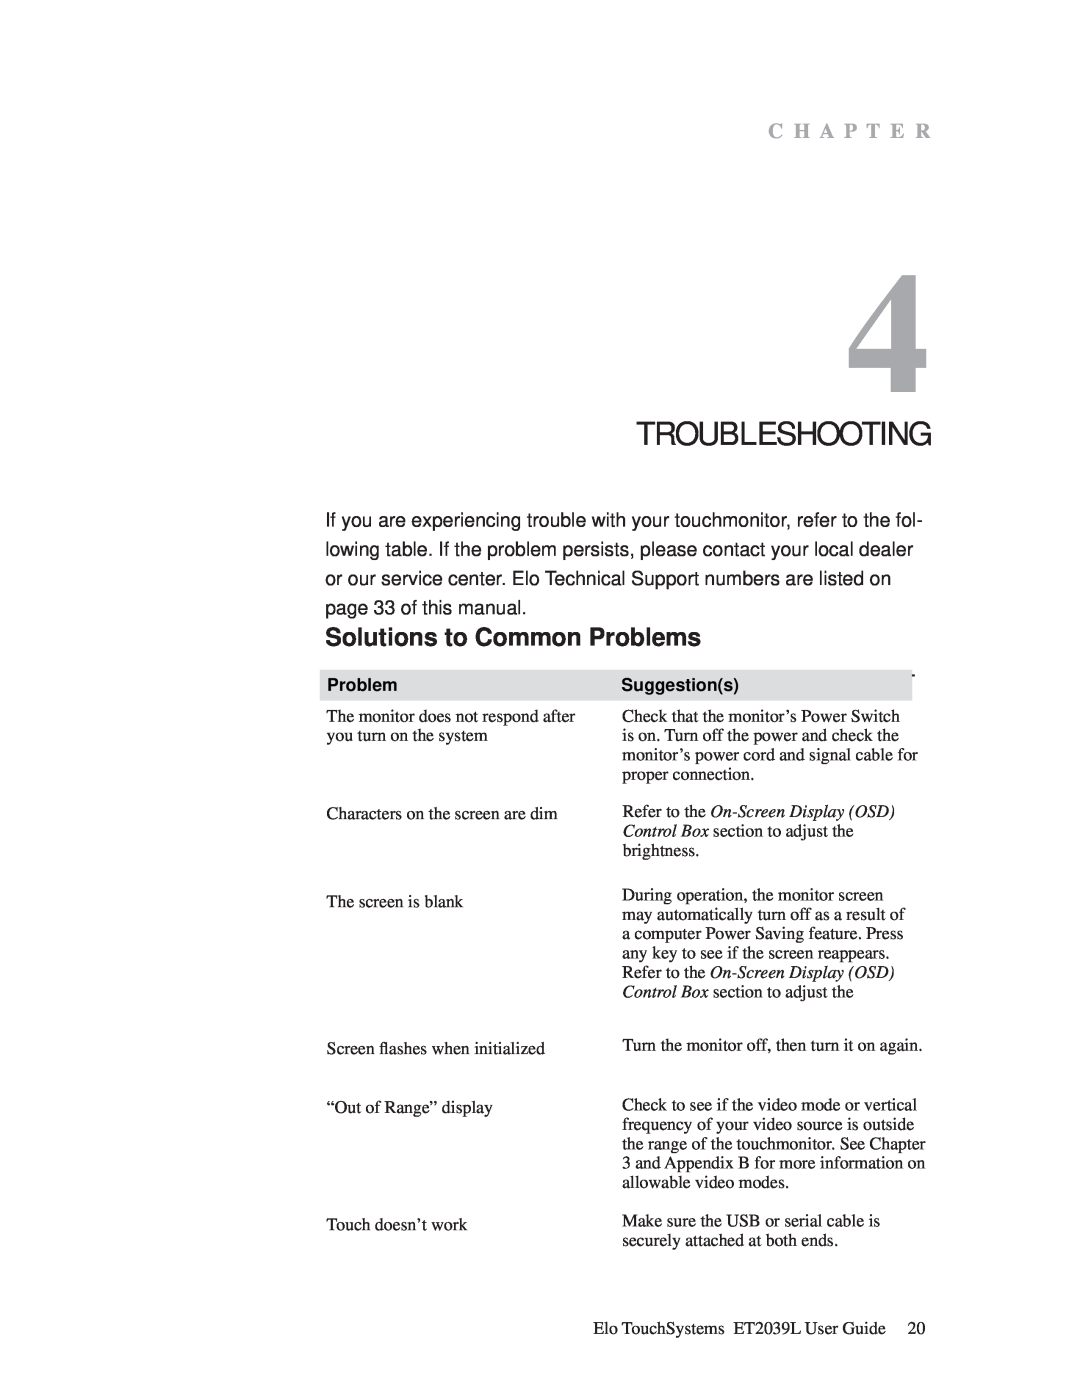 Elo TouchSystems ET2039L manual Troubleshooting, Solutions to Common Problems, C H A P T E R, ProblemSuggestions 